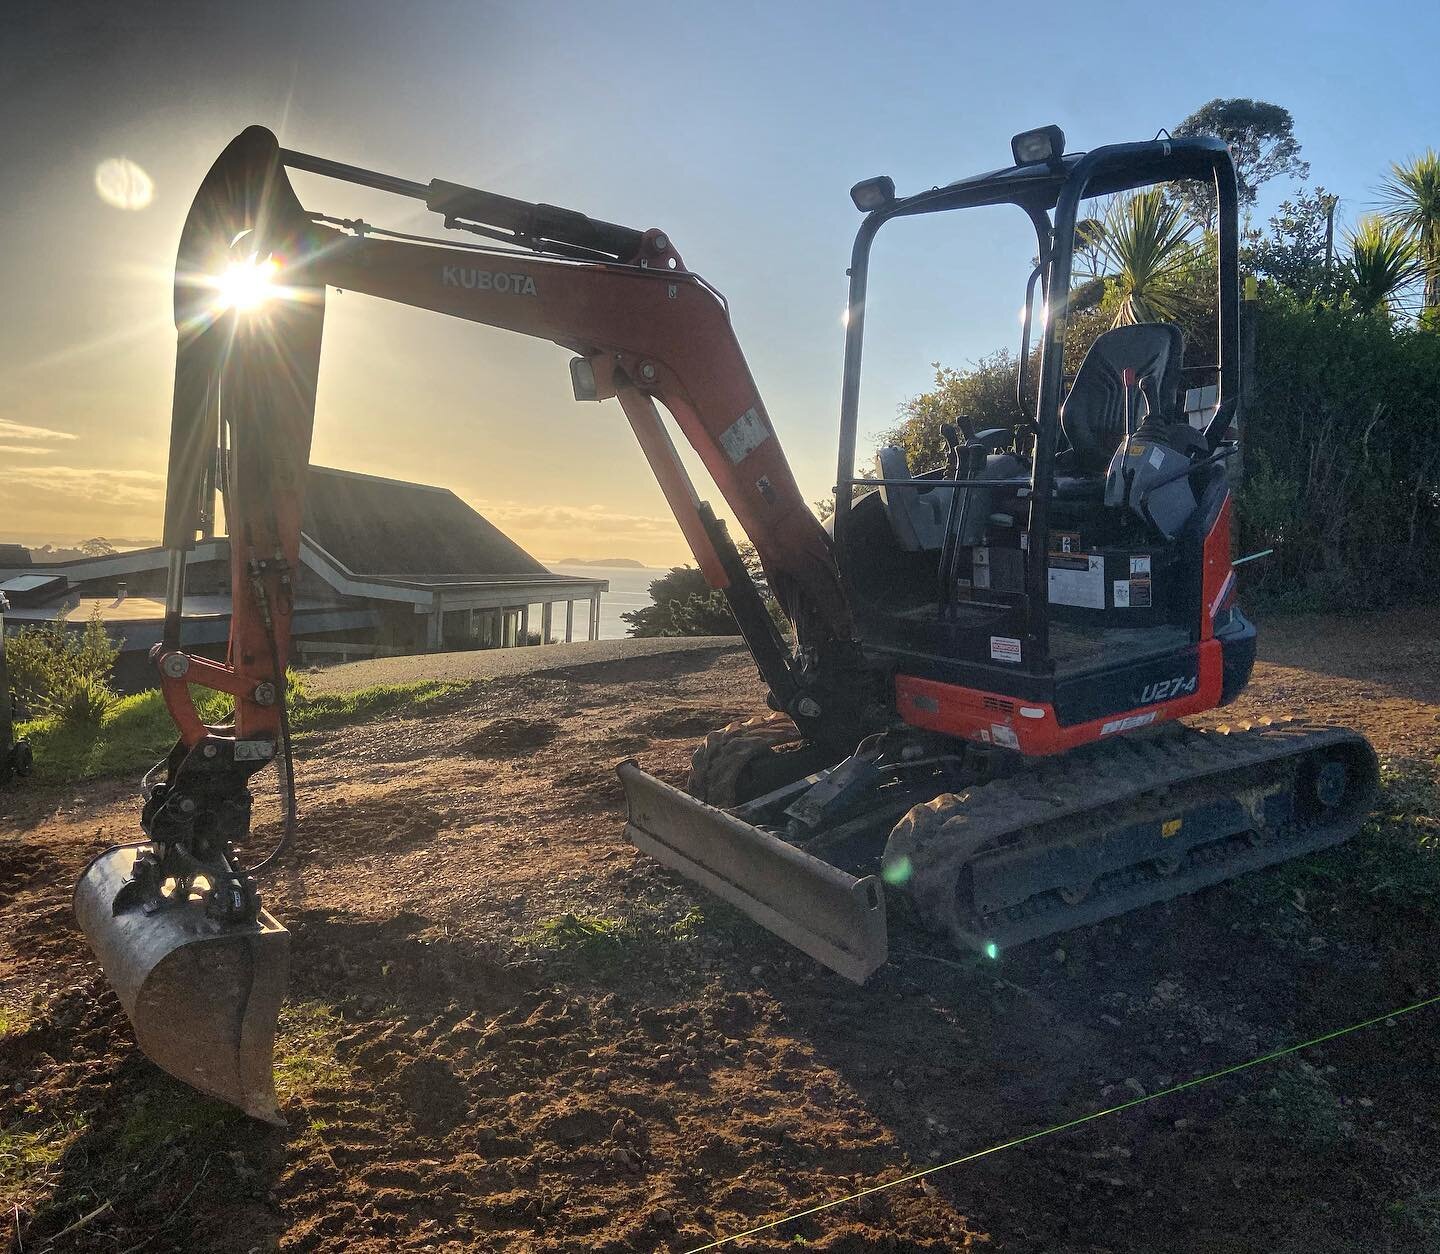 [[~~EARTHWORKS~~]]
.
Getting ready another driveway. 🚜🚜⚒⛏🧱
.
.
.
#earthworks #waihekedriveways #waihekelandscaping #waiheke #driveways #earthmoving